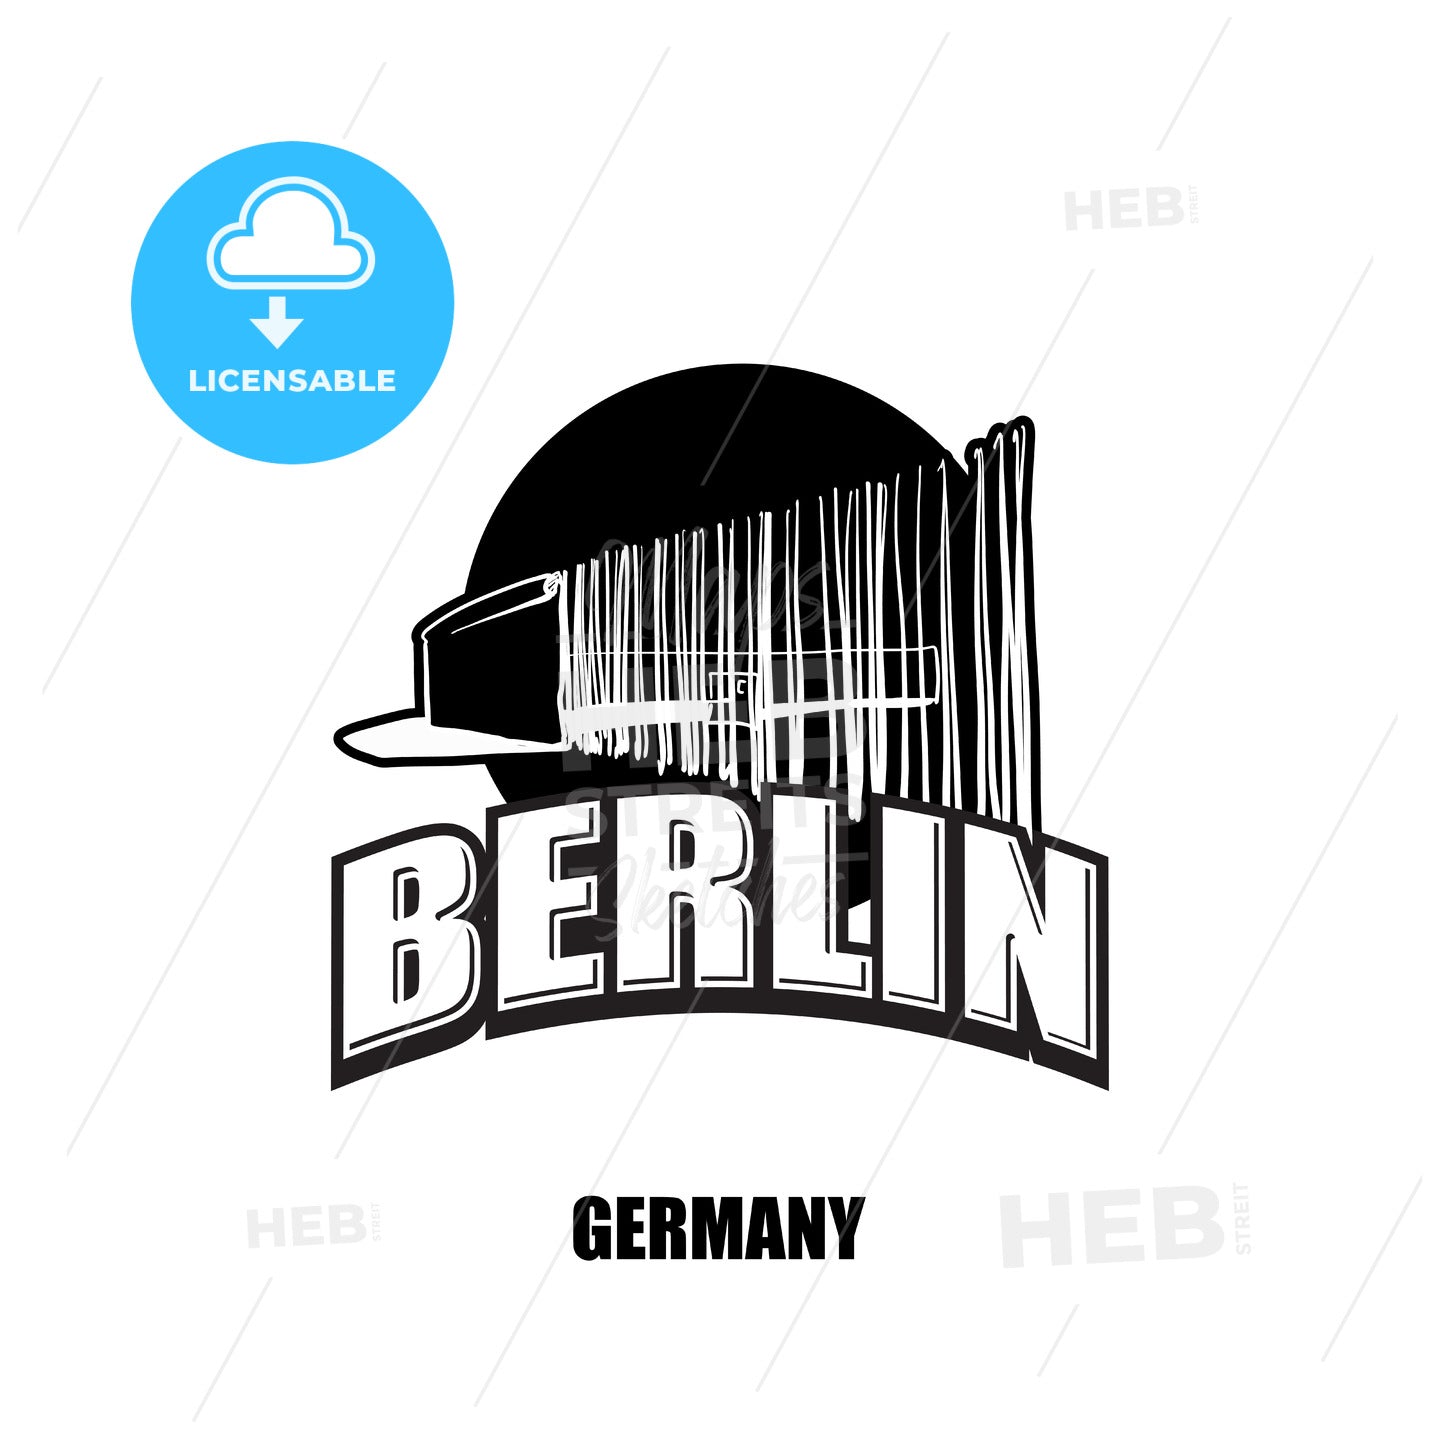 Berlin, wall, black and white logo – instant download